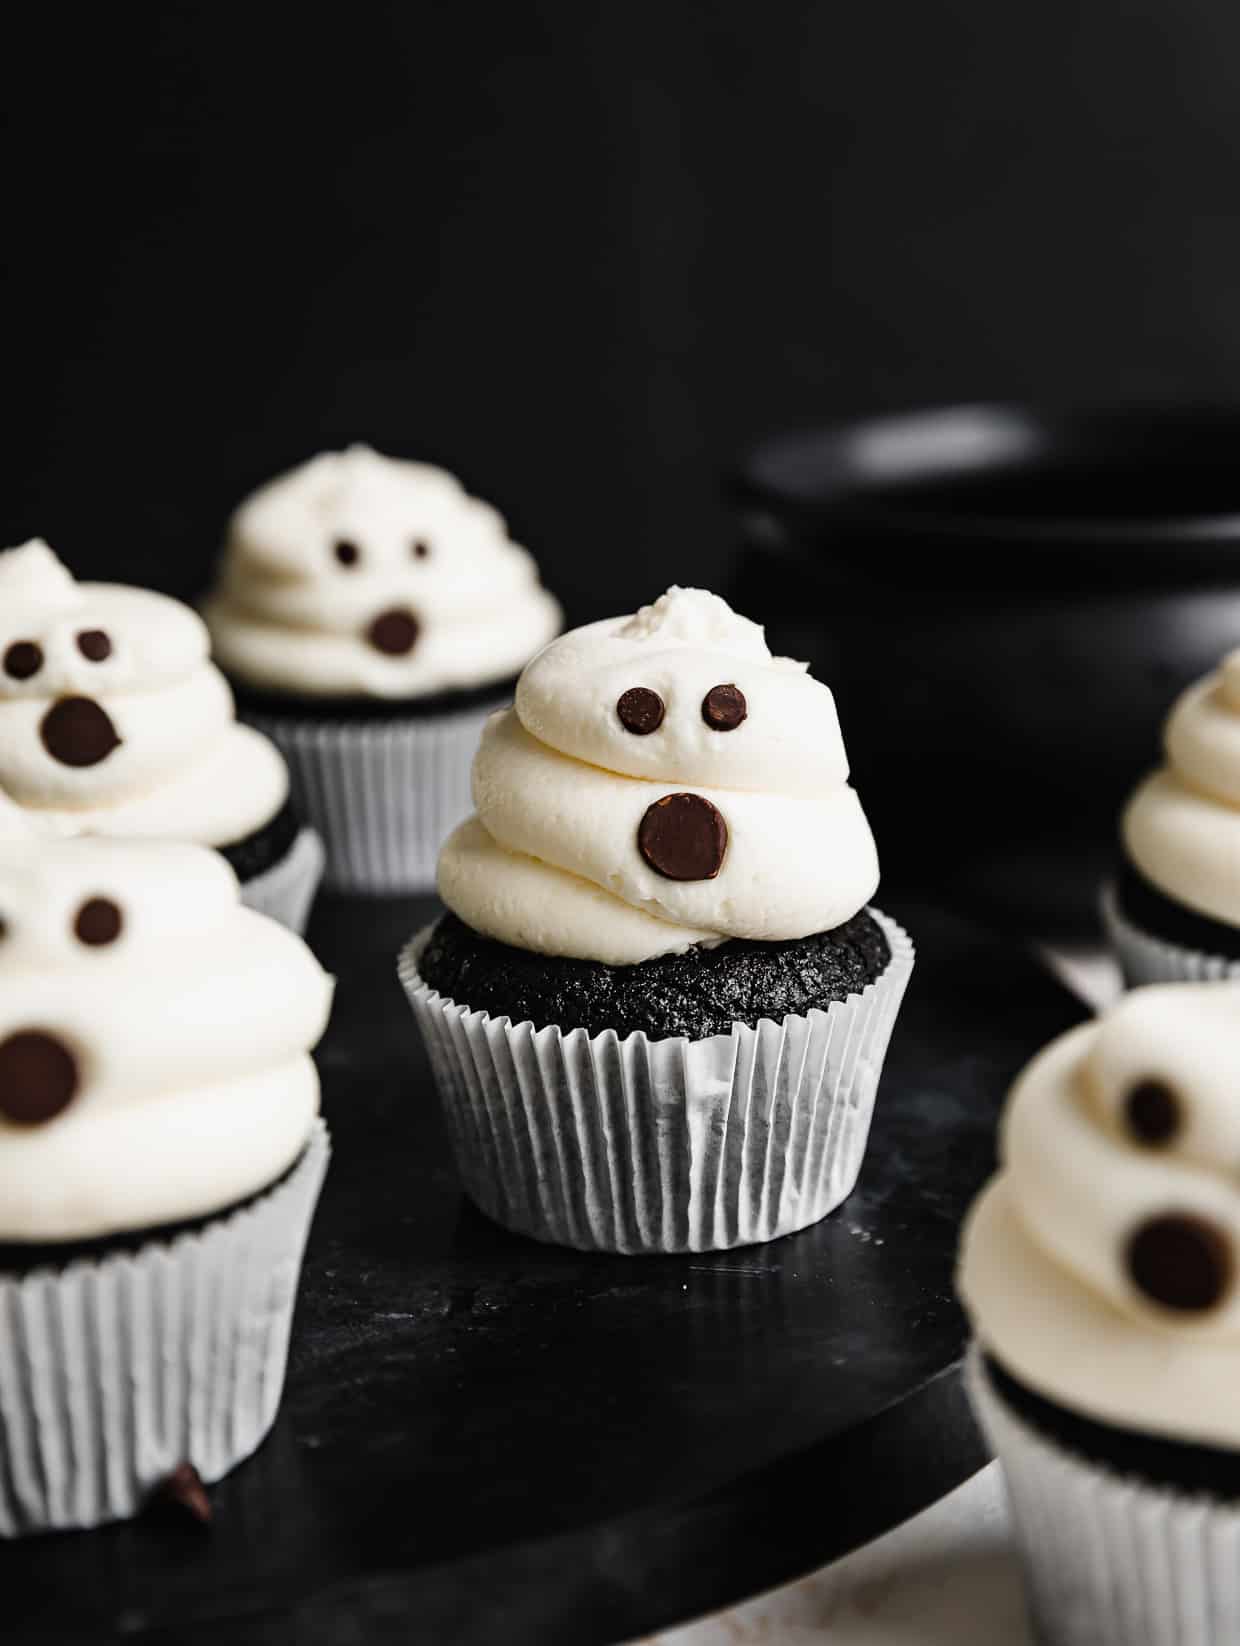 Ghost Cupcakes on a black table against a black background.